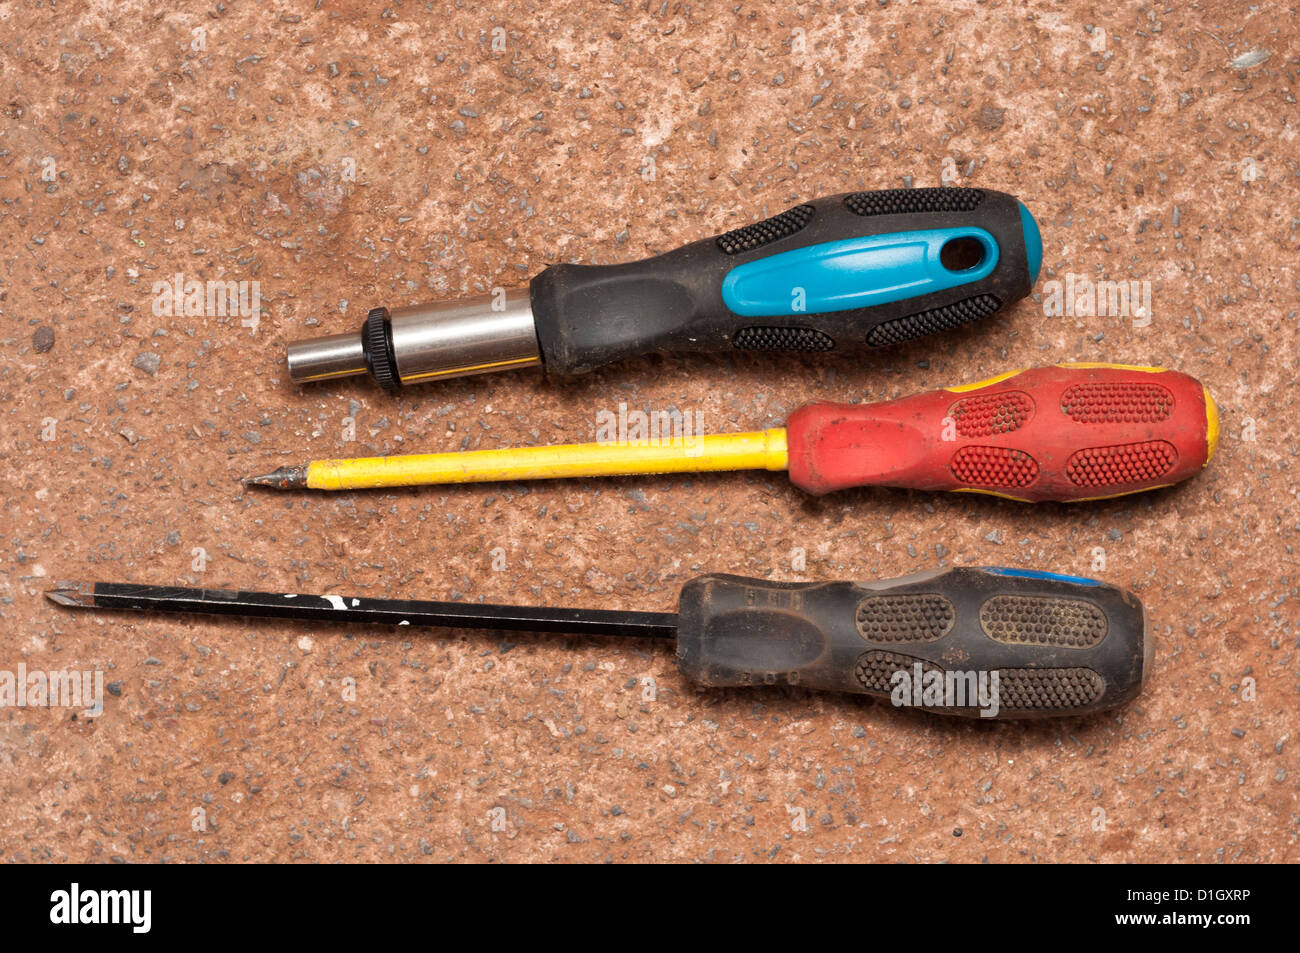 Hand tools old screwdrivers and newer adjustable screwdriver. Stock Photo